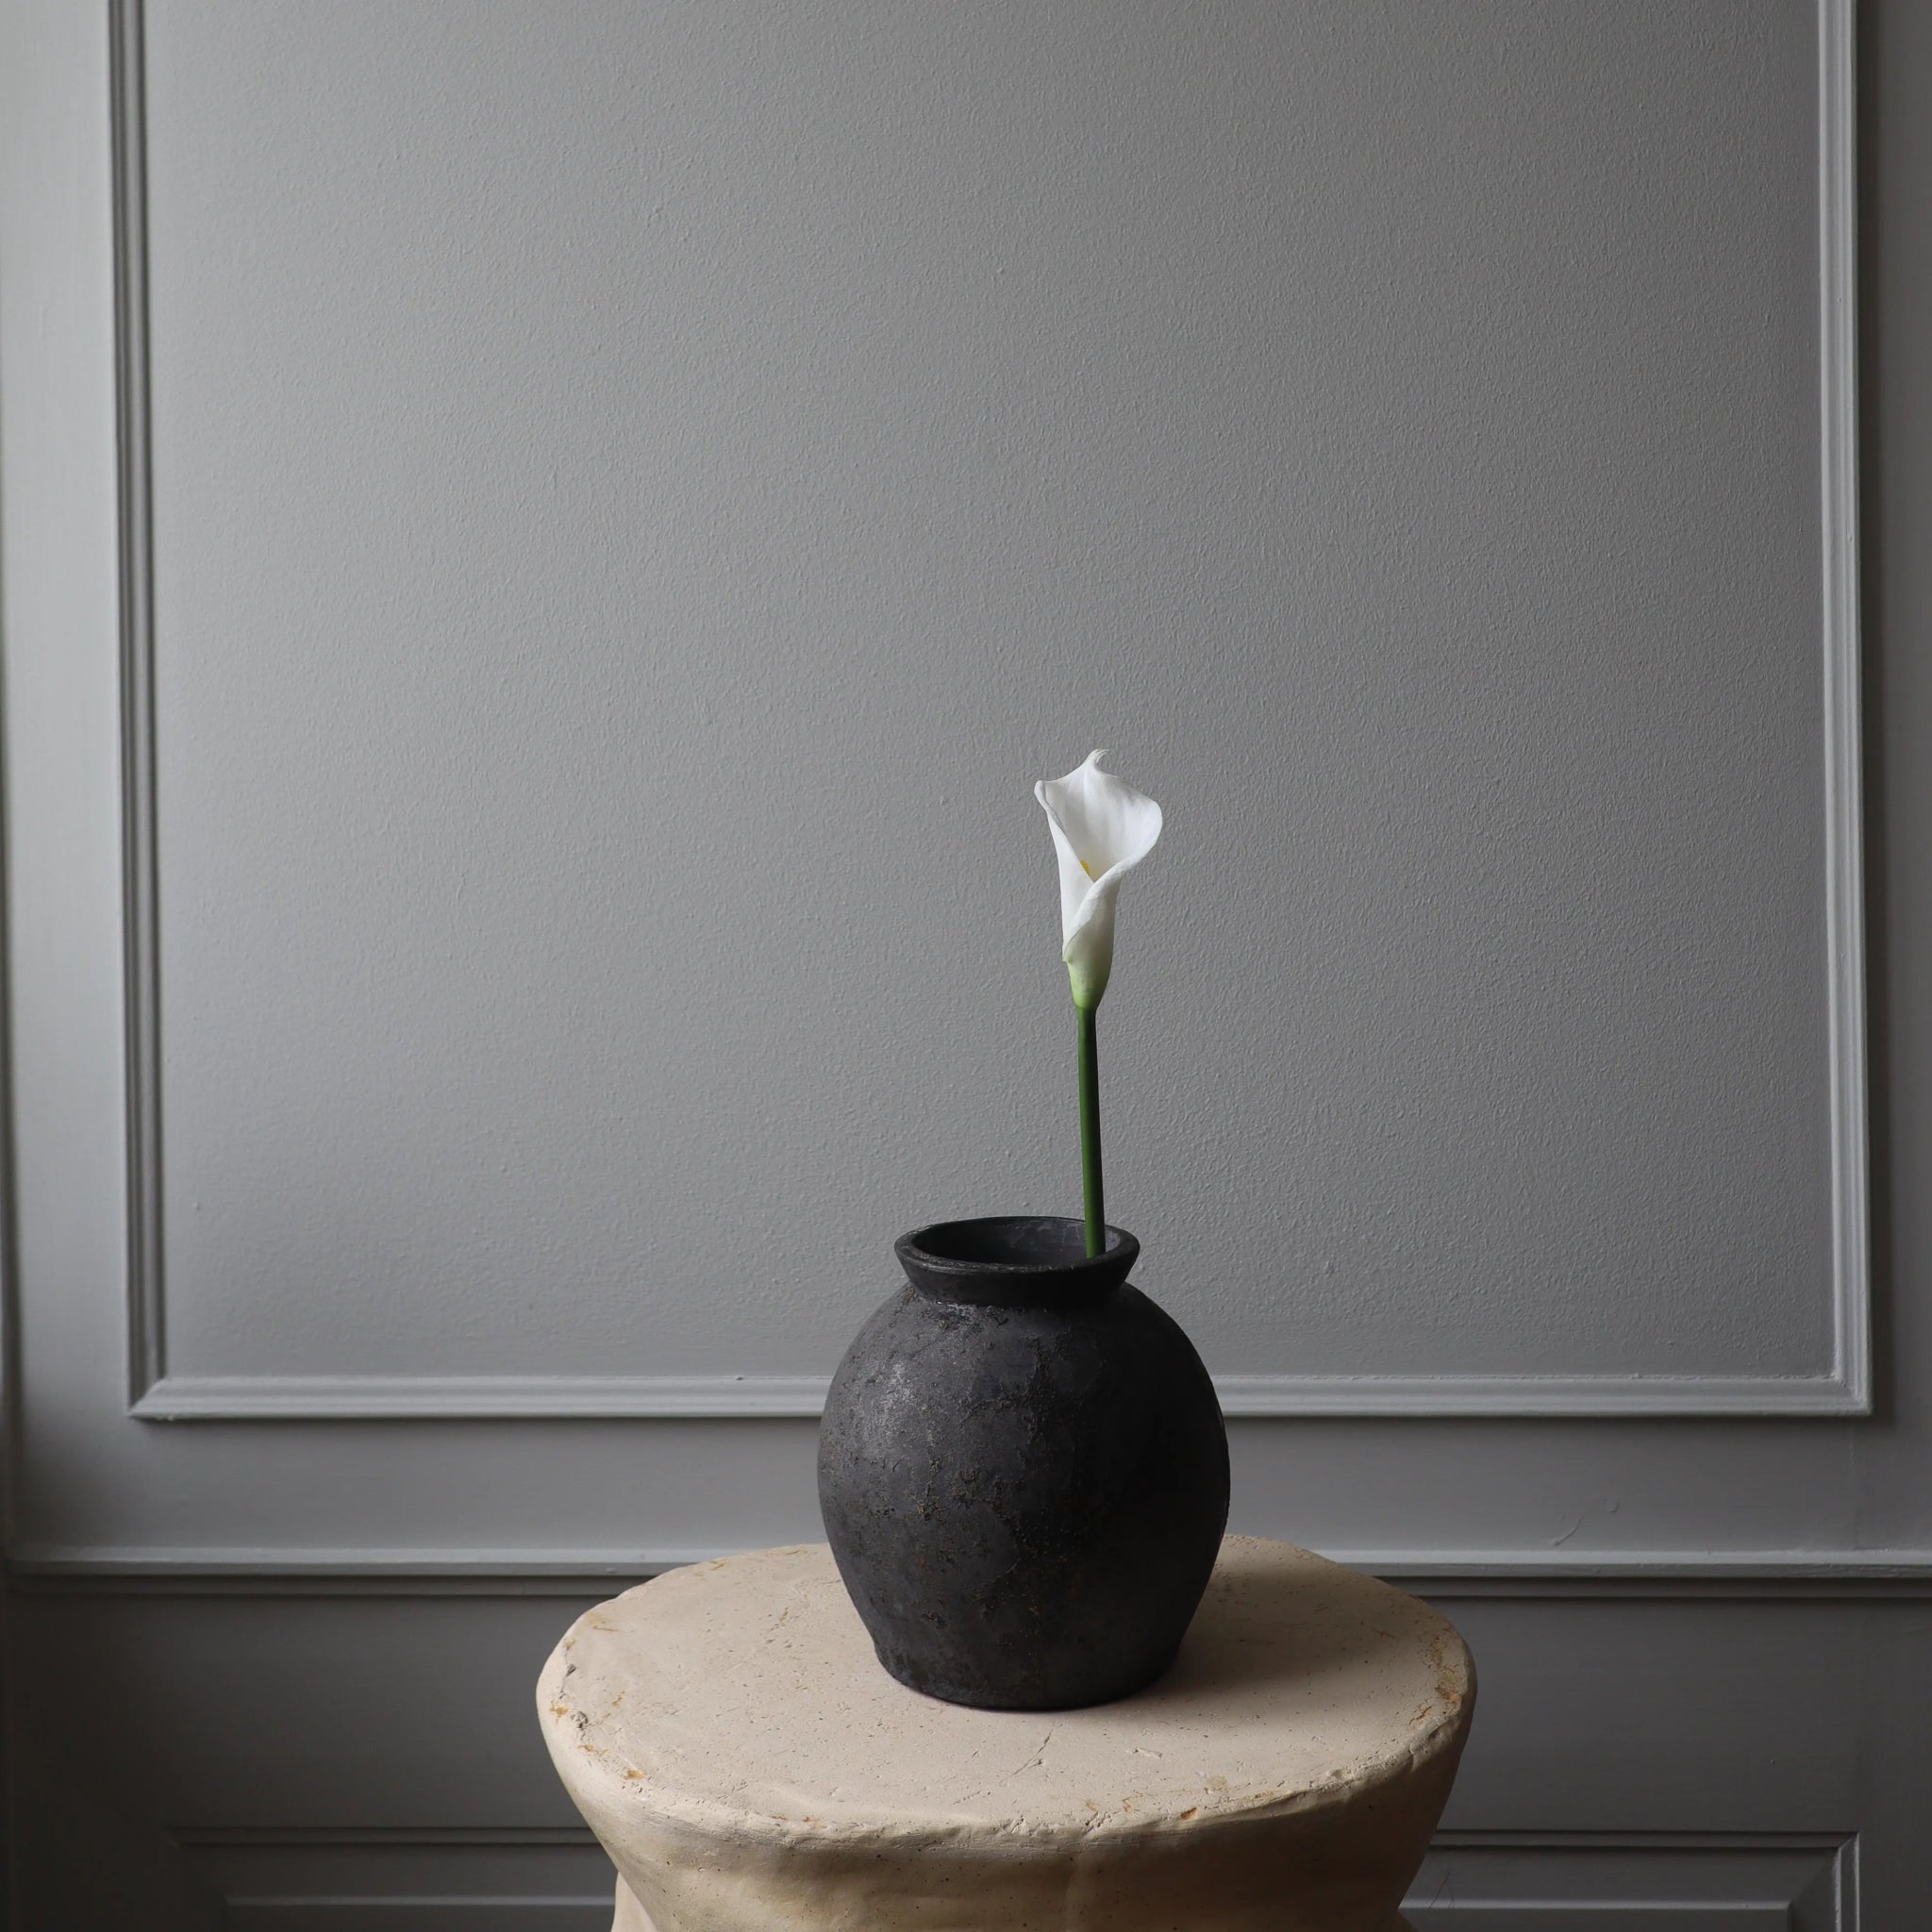 Calla Lily Flower in White from Botané